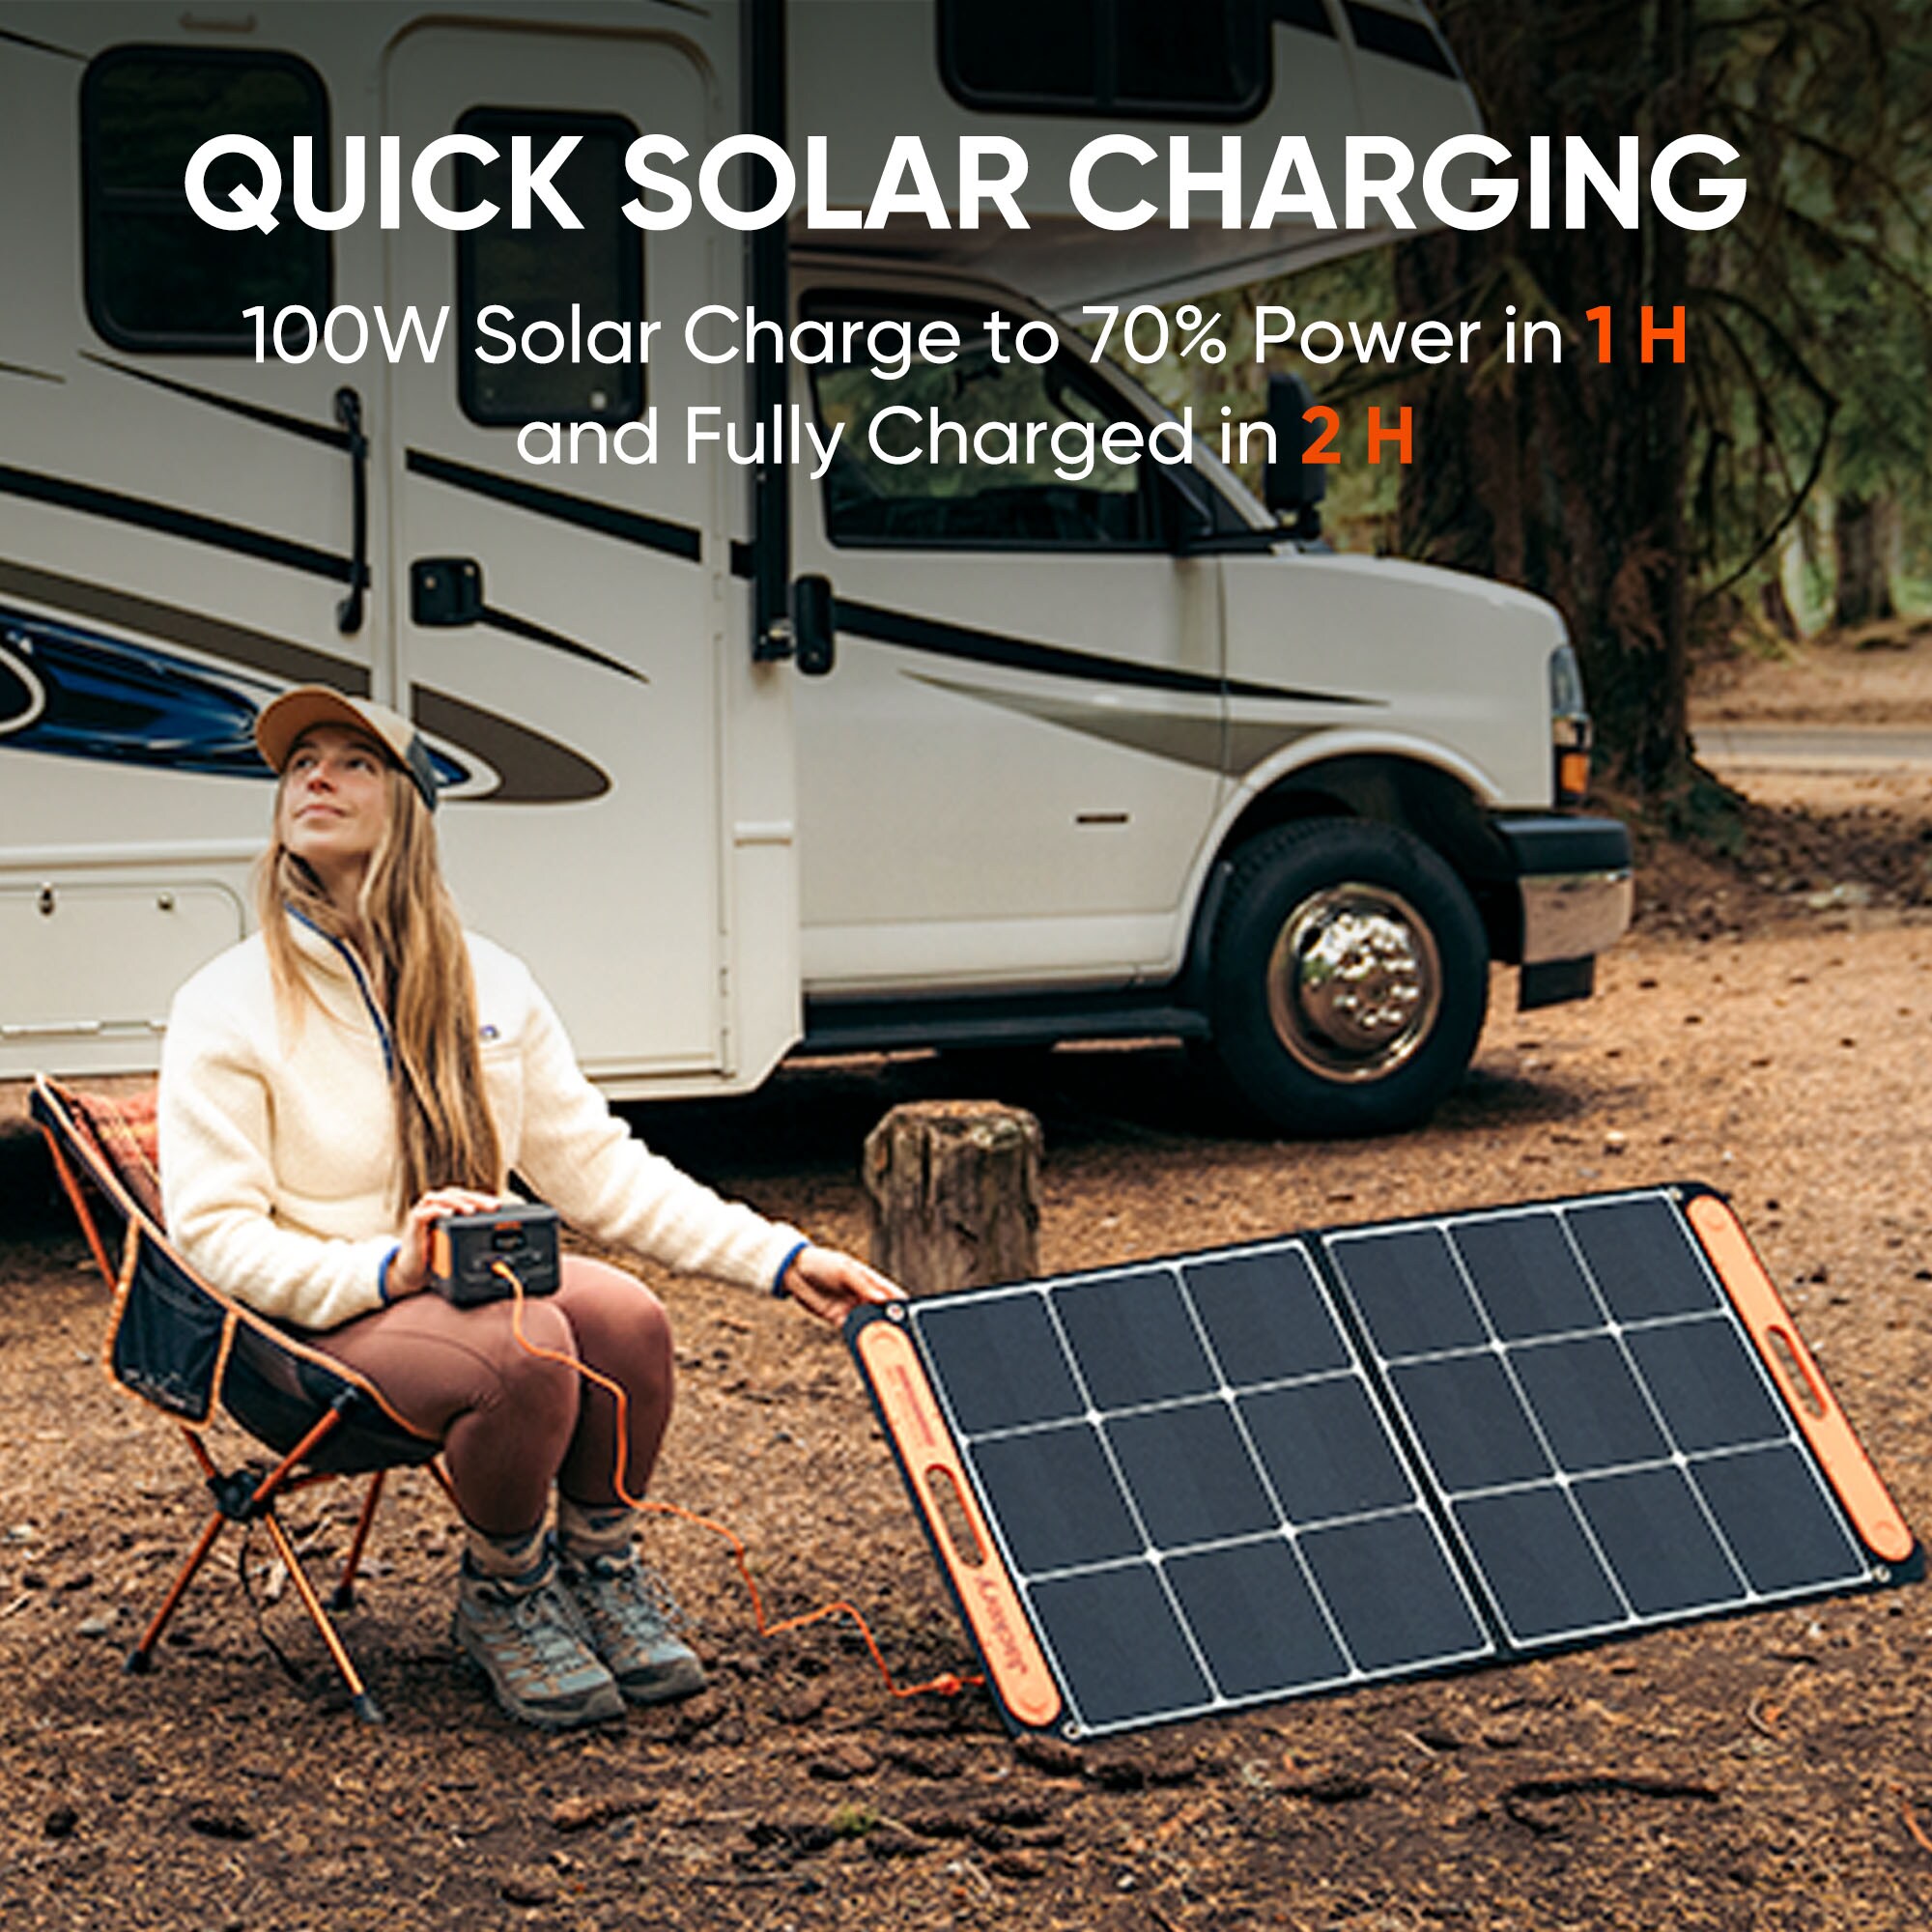 Jackery Explorer 700 Plus power station with 100W solar panel offers 681Wh  battery for $699